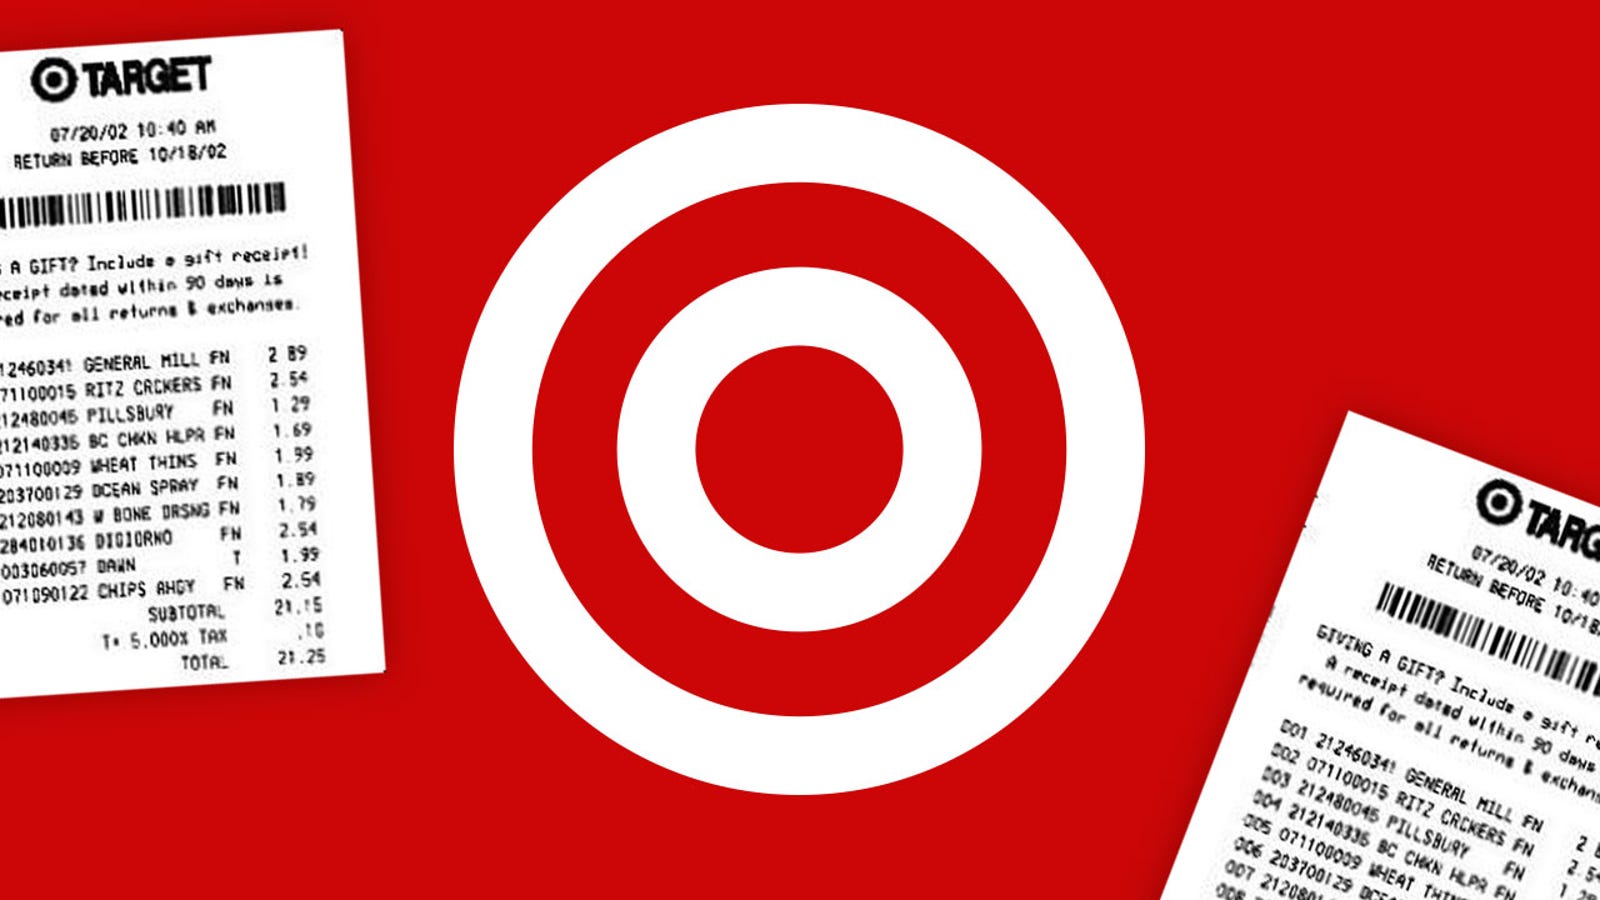 Get Free Store Credit from Target with a Strange Return